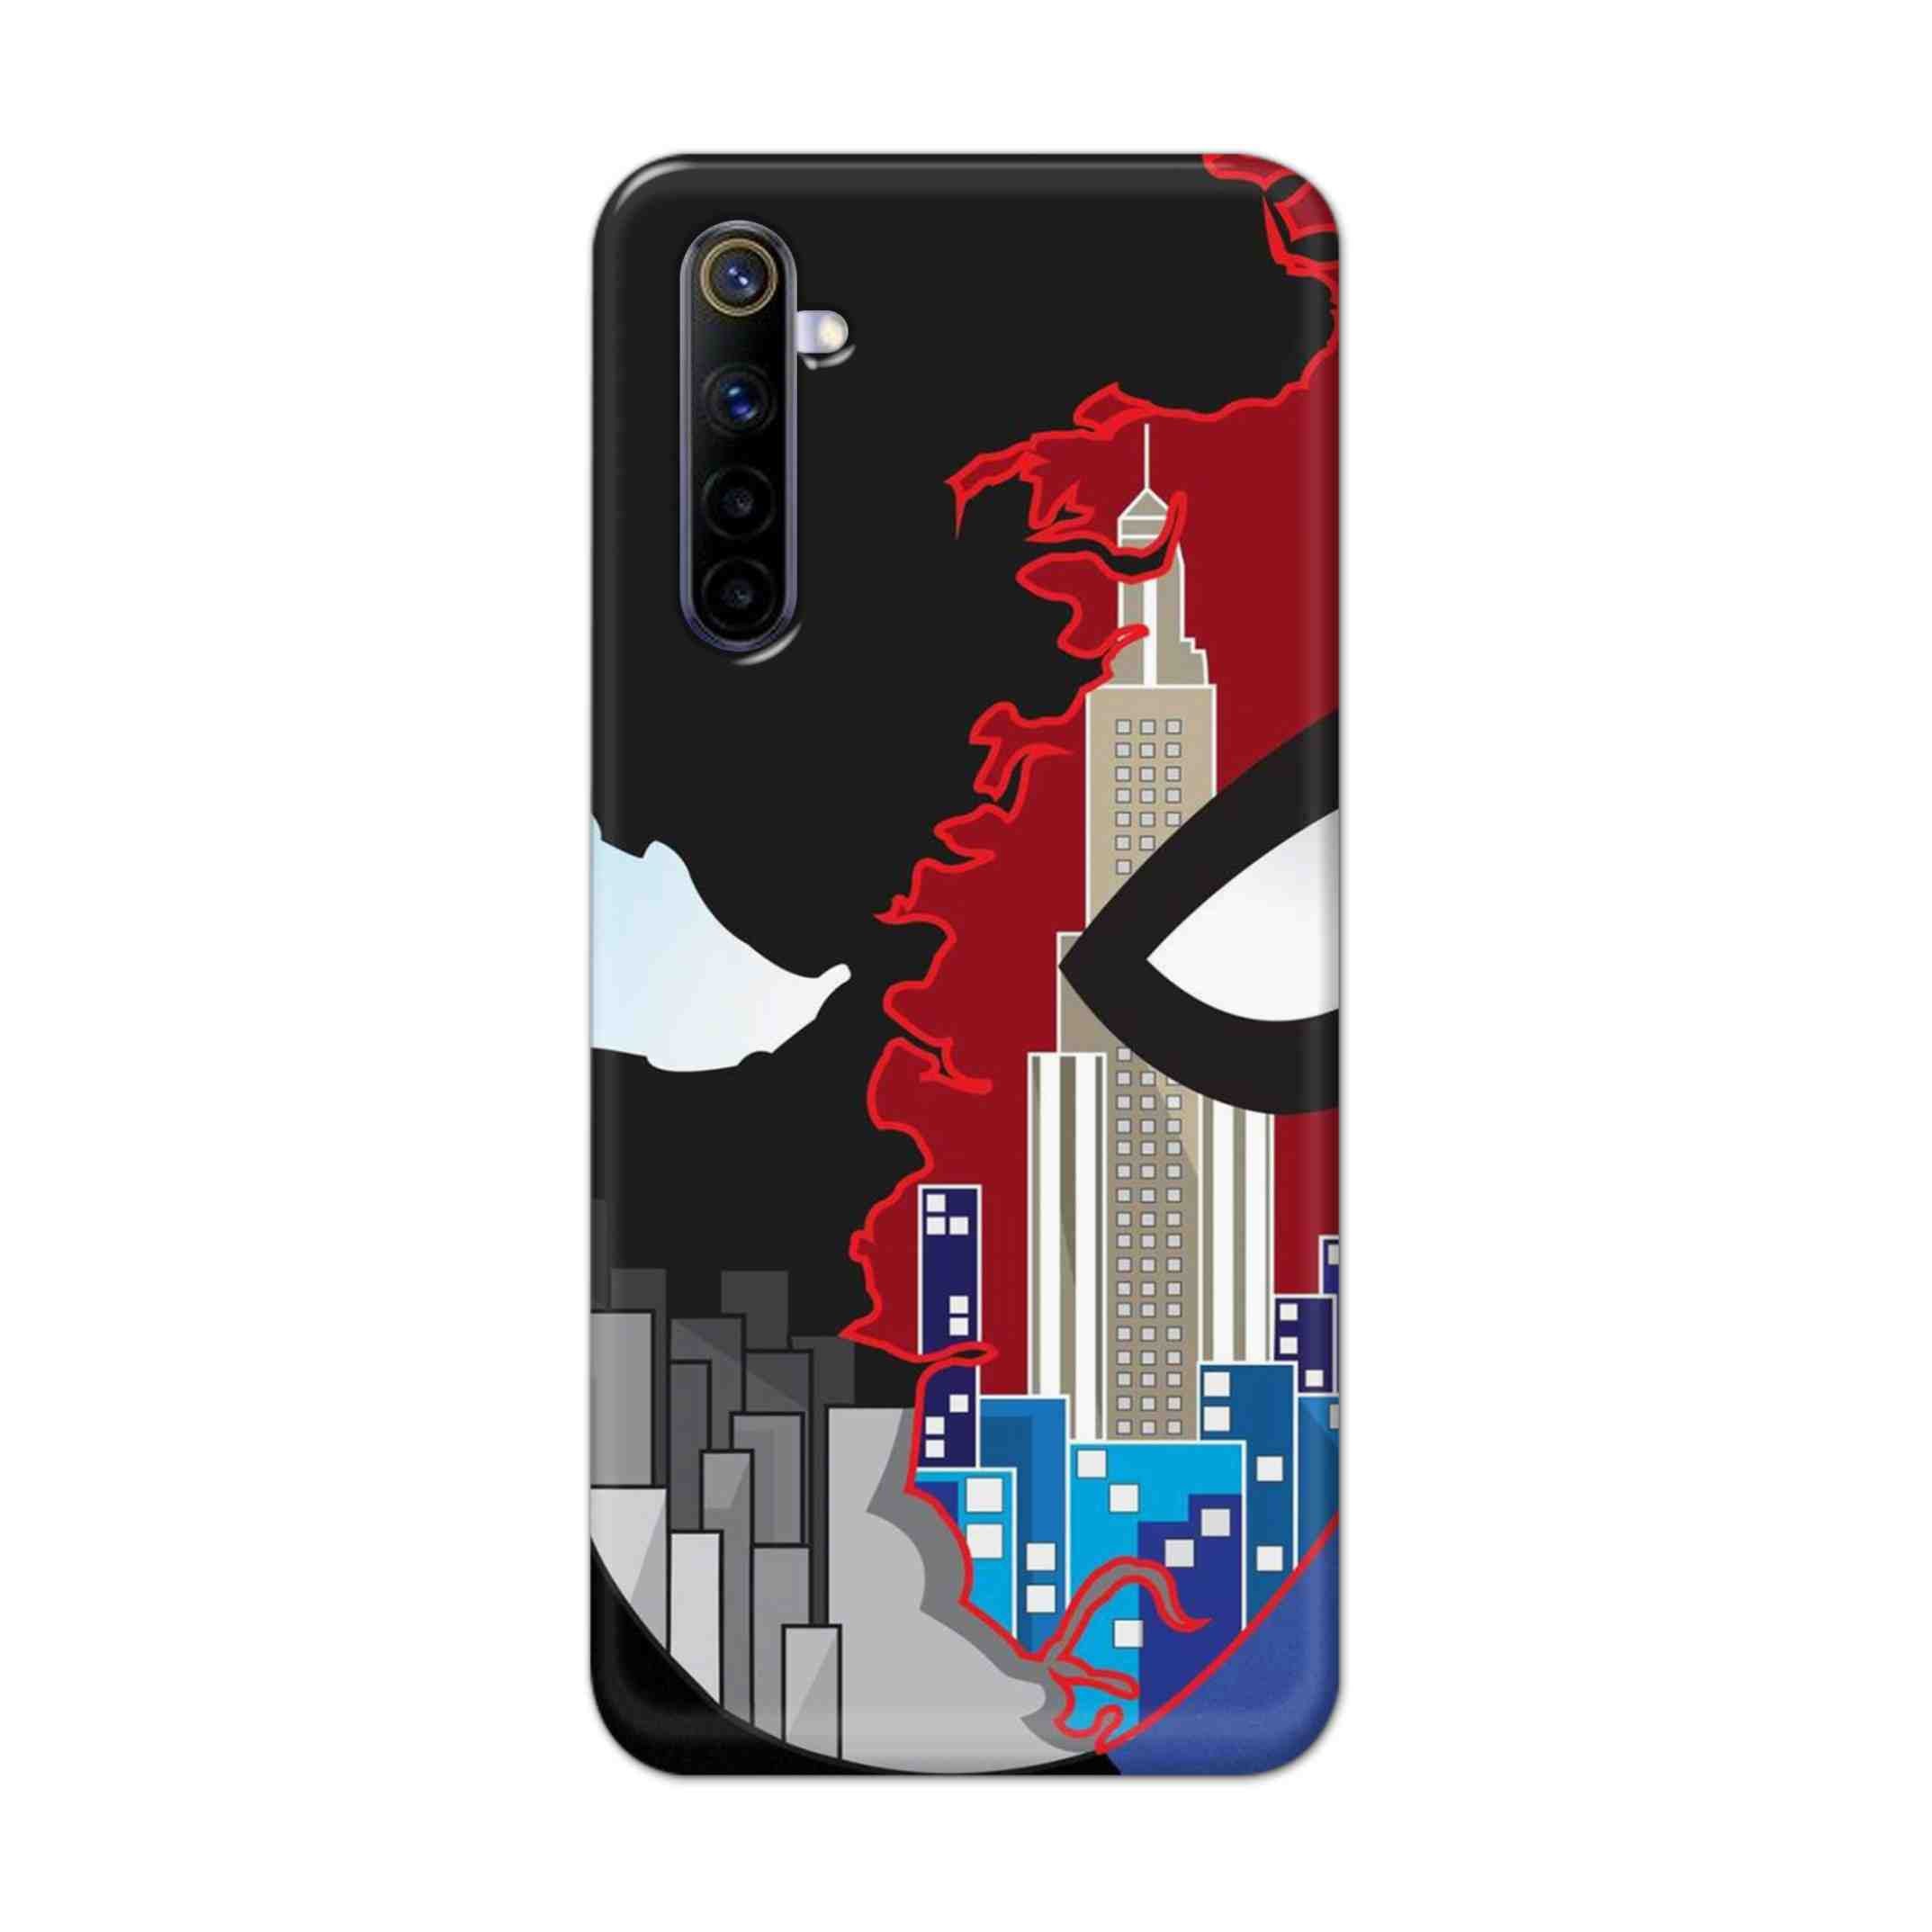 Buy Red And Black Spiderman Hard Back Mobile Phone Case Cover For REALME 6 PRO Online